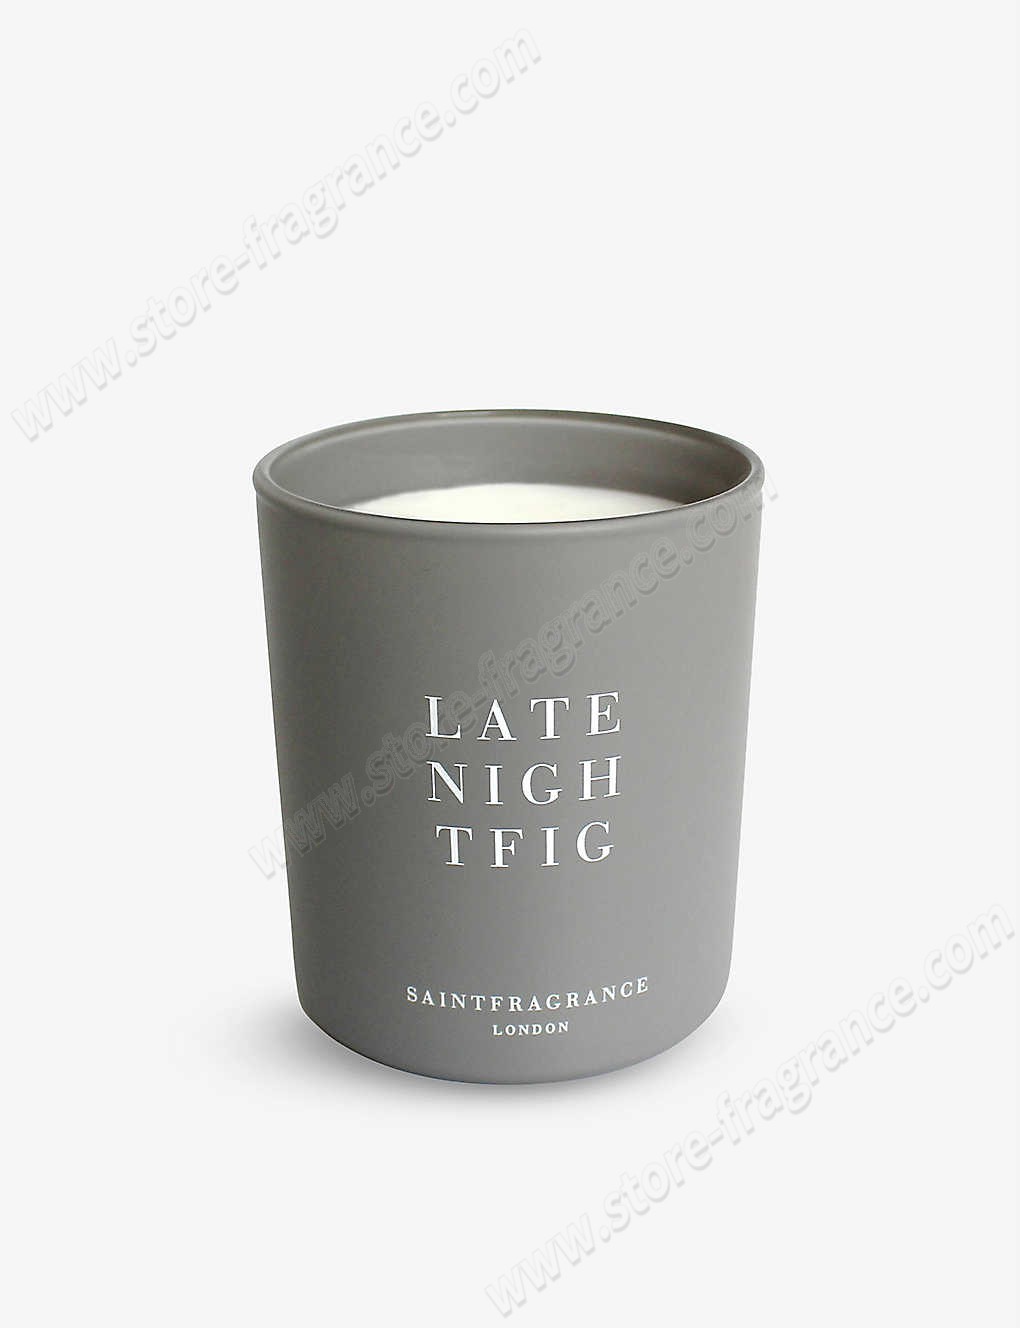 SAINT FRAGRANCE LONDON/Late Night Fig scented candle 200g ✿ Discount Store - SAINT FRAGRANCE LONDON/Late Night Fig scented candle 200g ✿ Discount Store